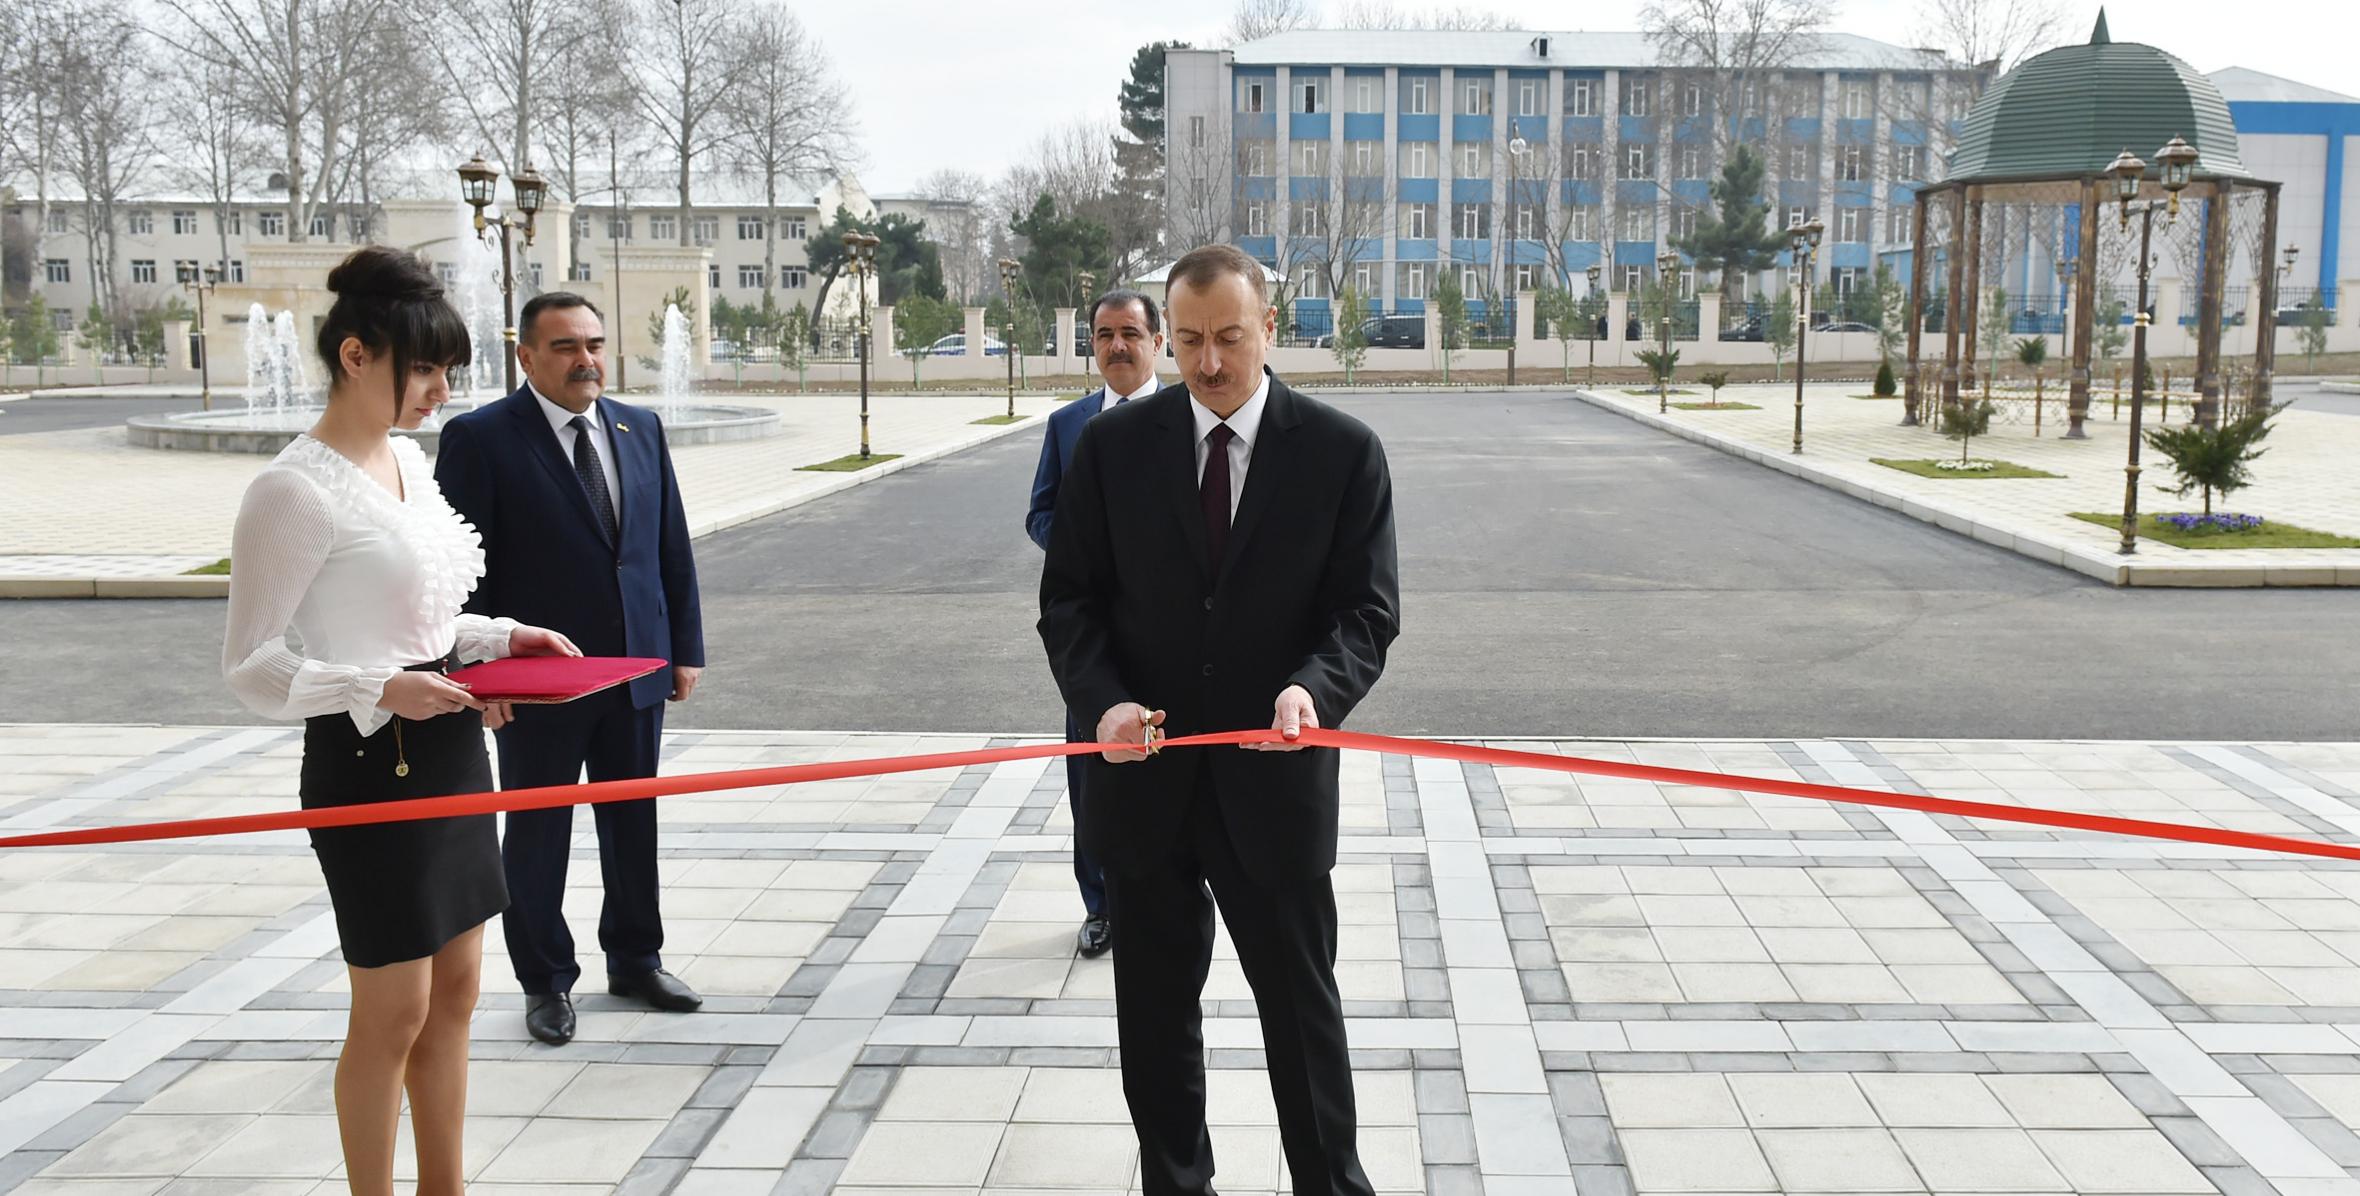 Ilham Aliyev attended the opening of dormitory of Azerbaijan State Agrarian University